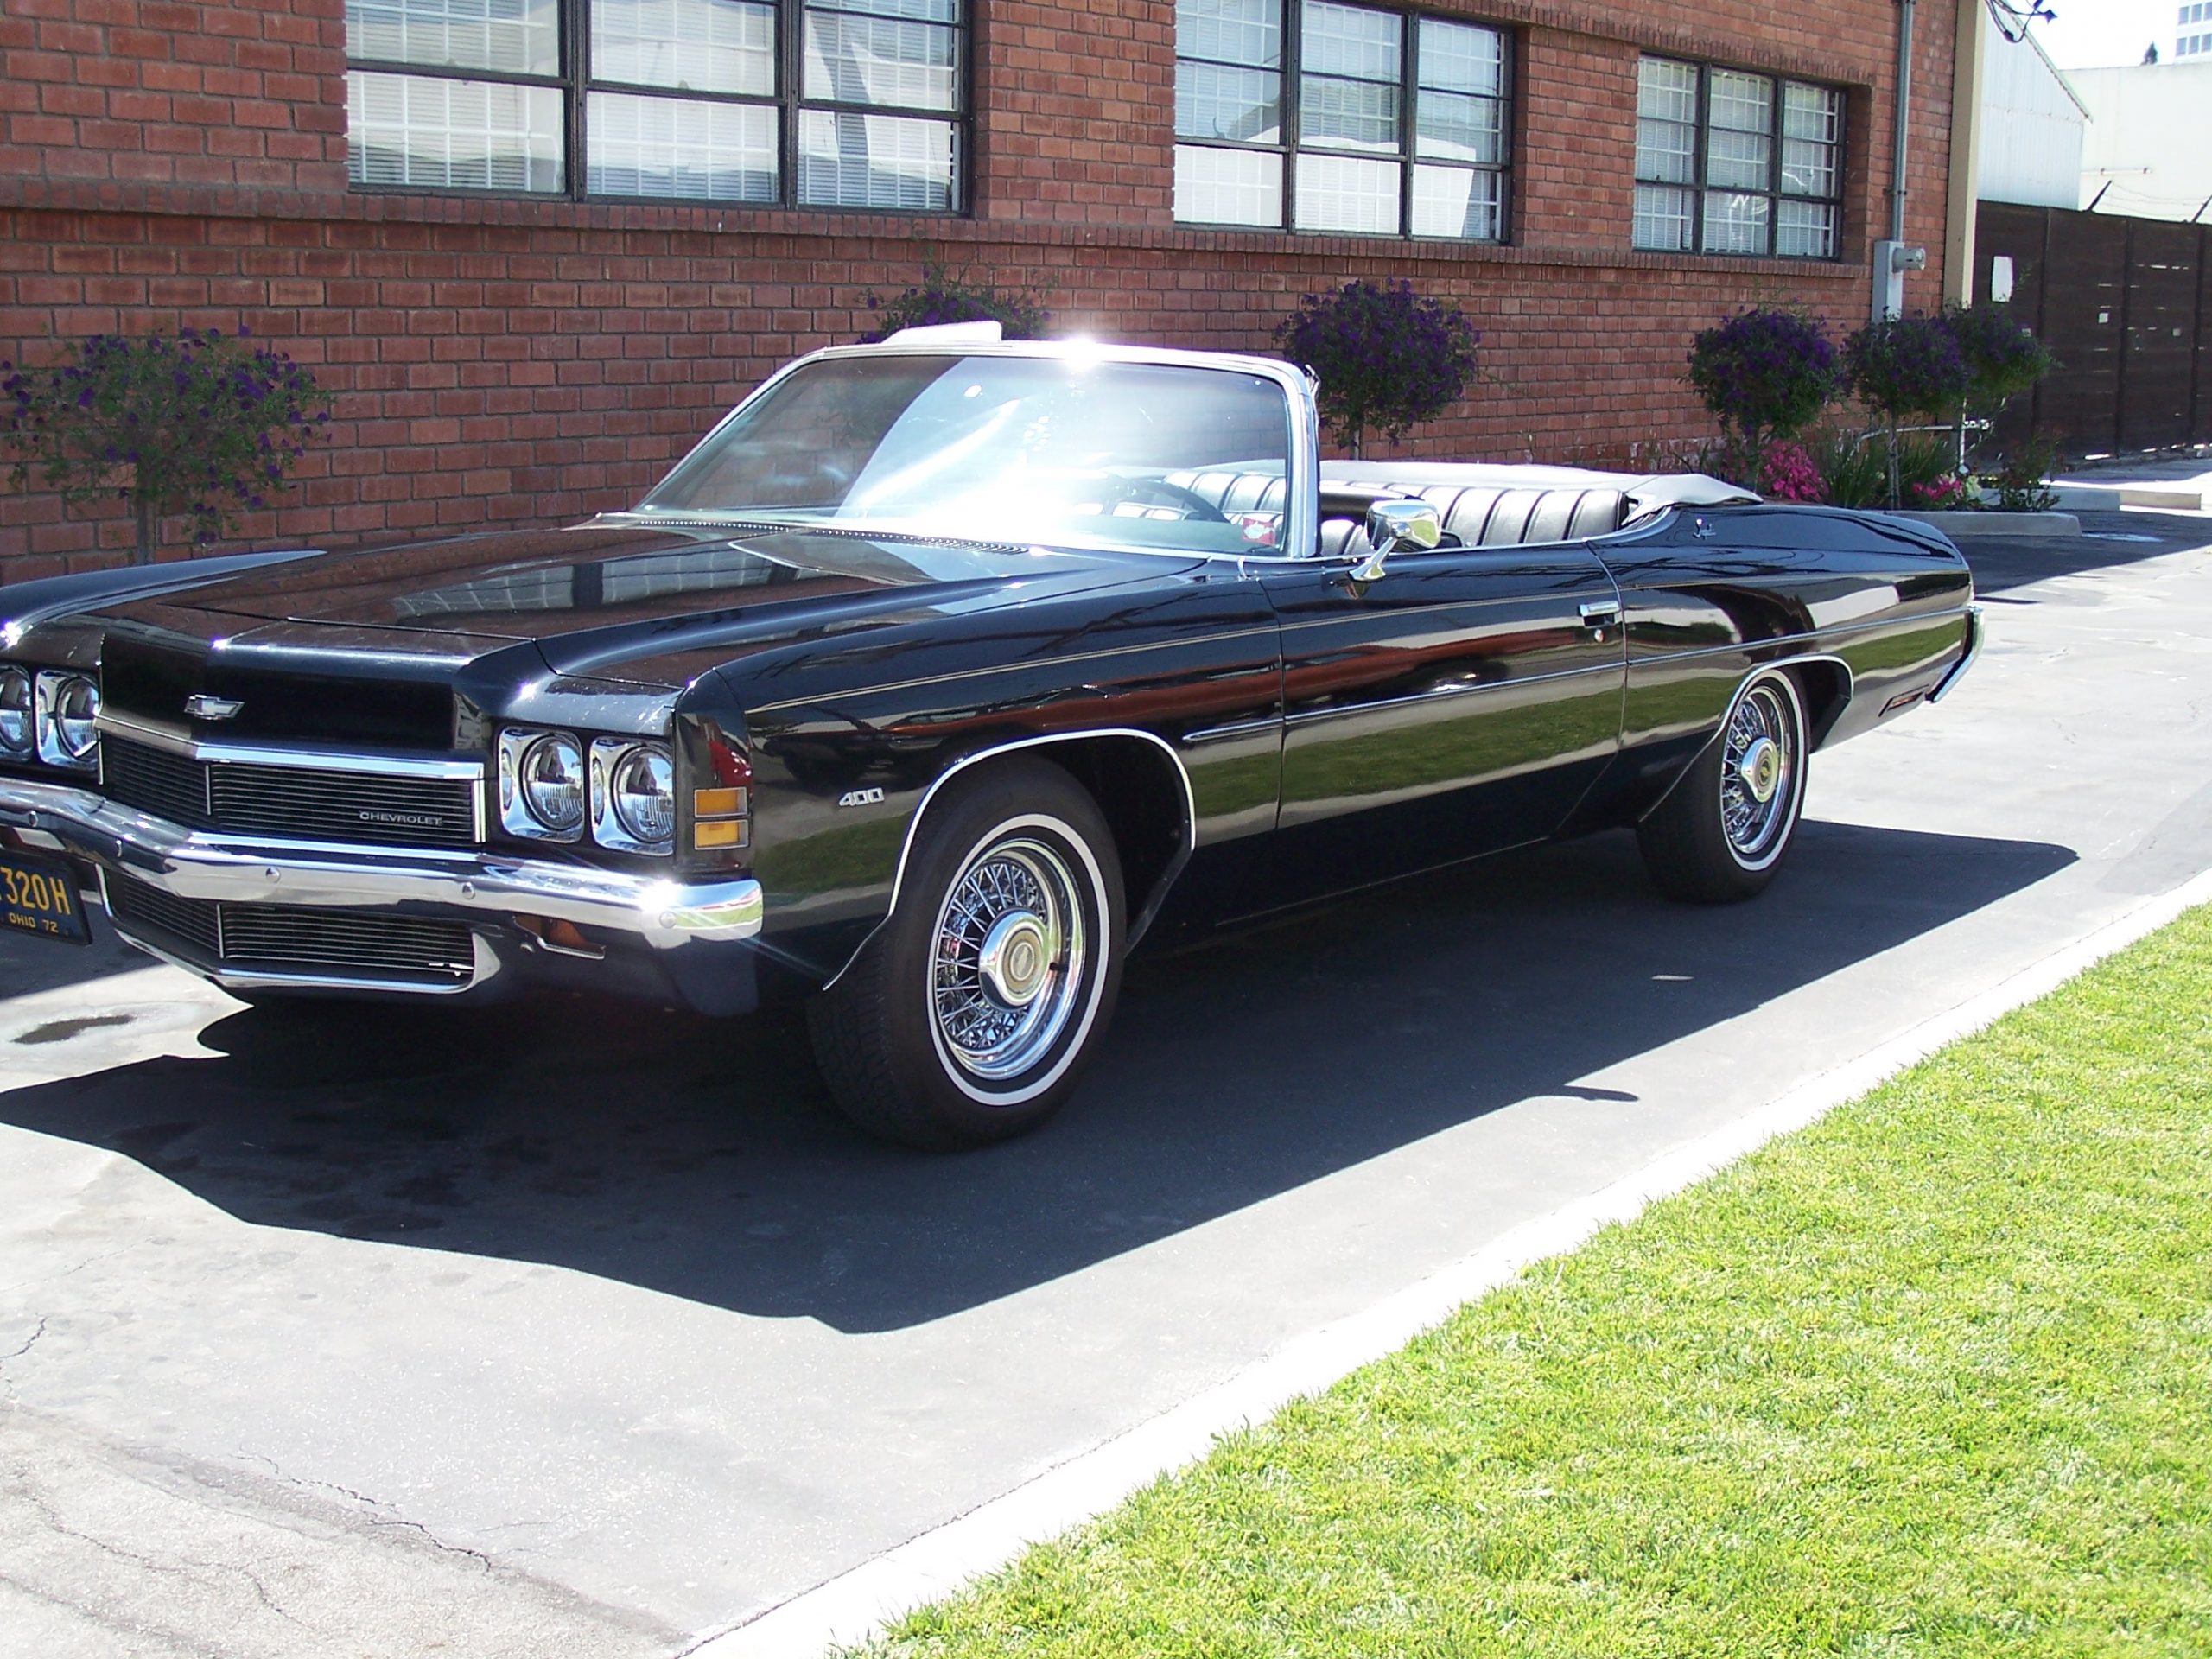 1972 Chevy Impala for rent